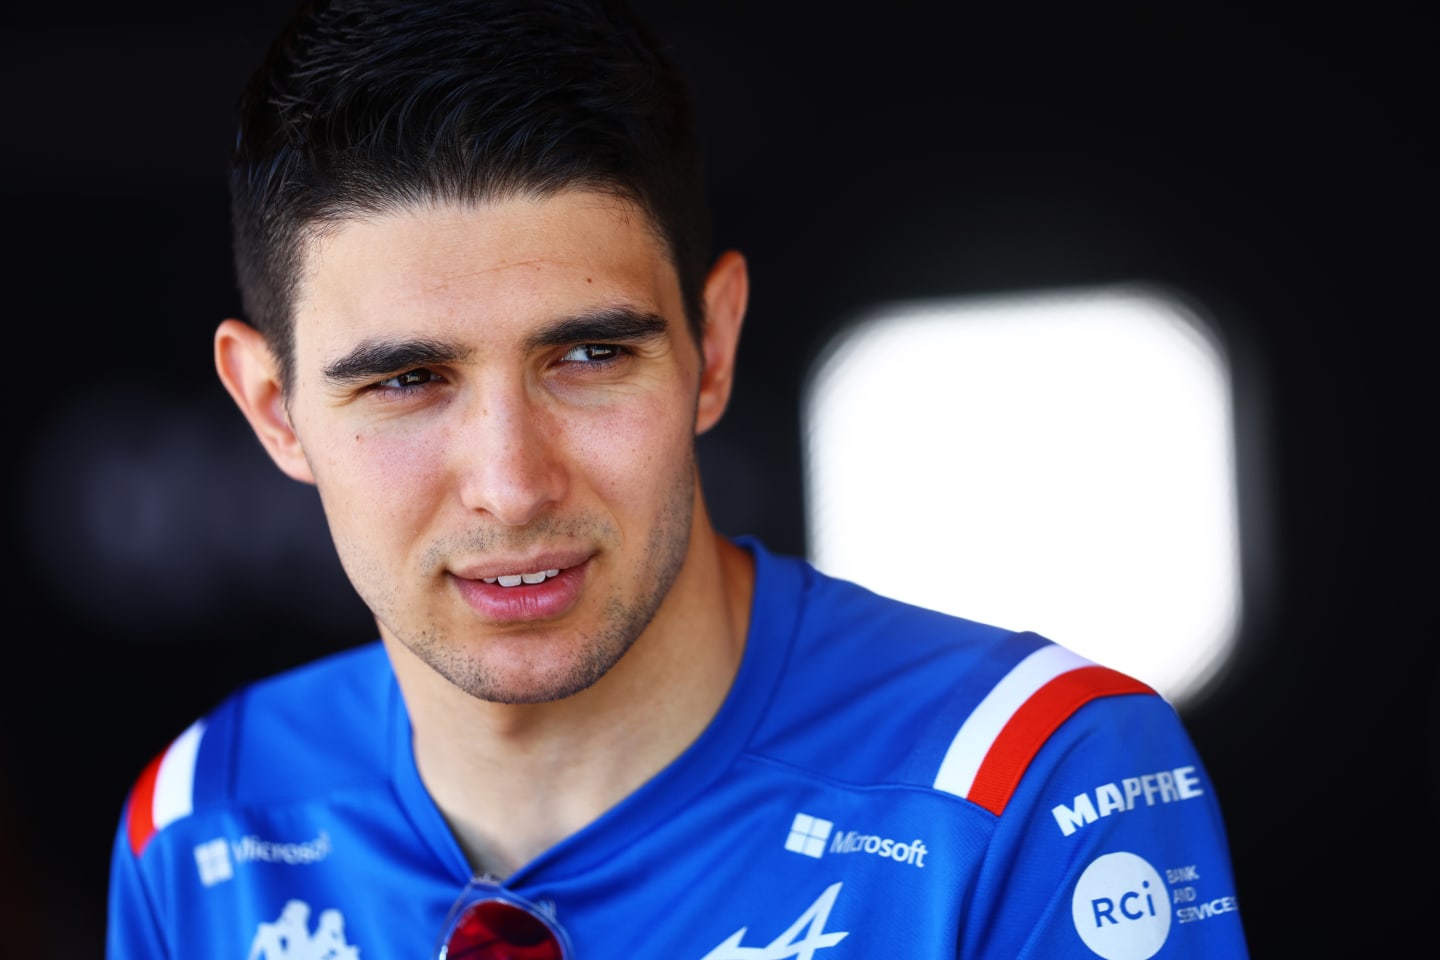 BAKU, AZERBAIJAN - JUNE 10: Esteban Ocon of France and Alpine F1 talks to the media in the Paddock prior to practice ahead of the F1 Grand Prix of Azerbaijan at Baku City Circuit on June 10, 2022 in Baku, Azerbaijan. (Photo by Mark Thompson/Getty Images)